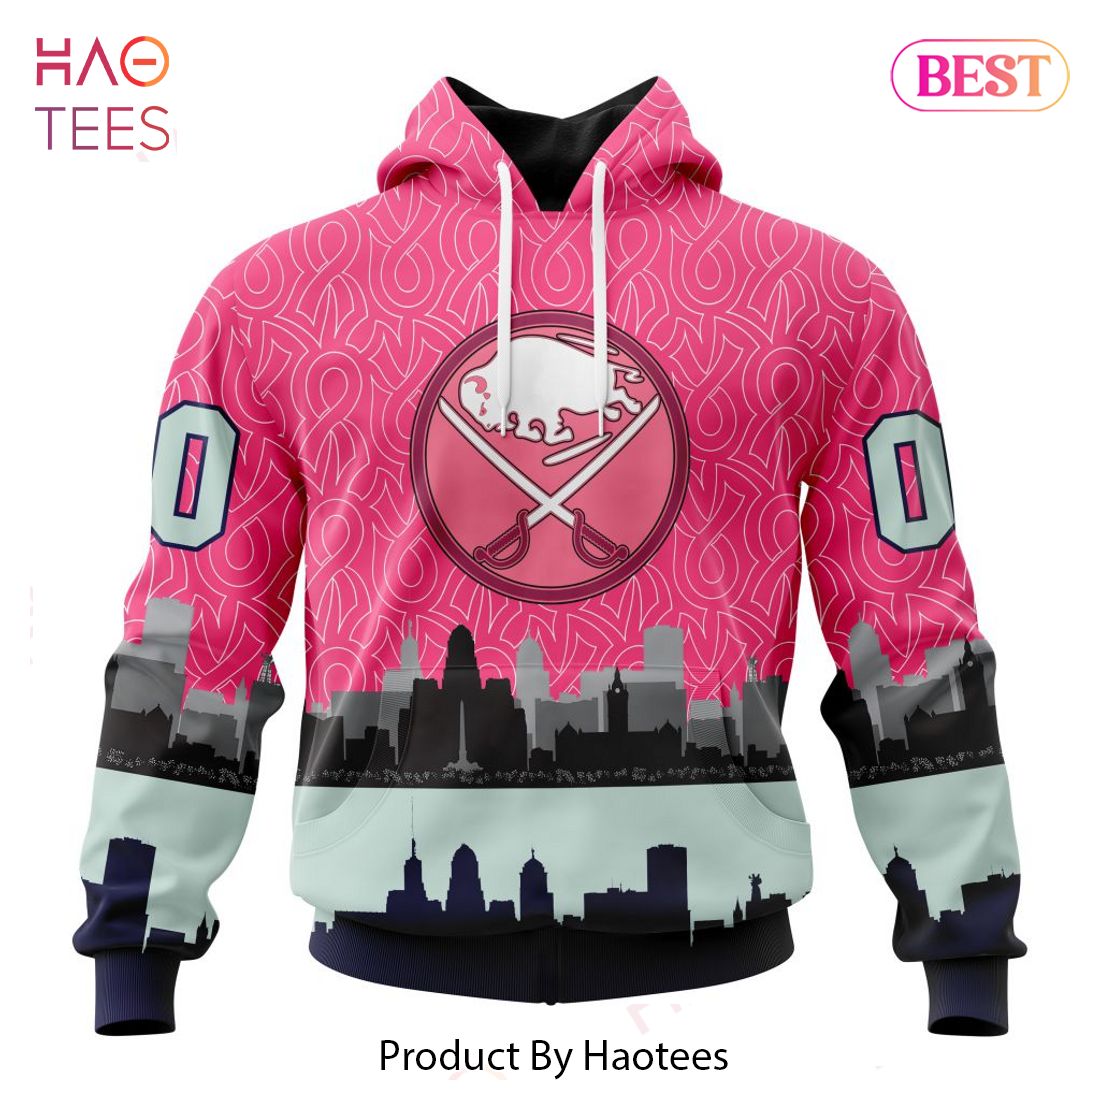 BEST NHL Buffalo Sabres Specialized Unisex Kits Hockey Fights Against Cancer 3D Hoodie